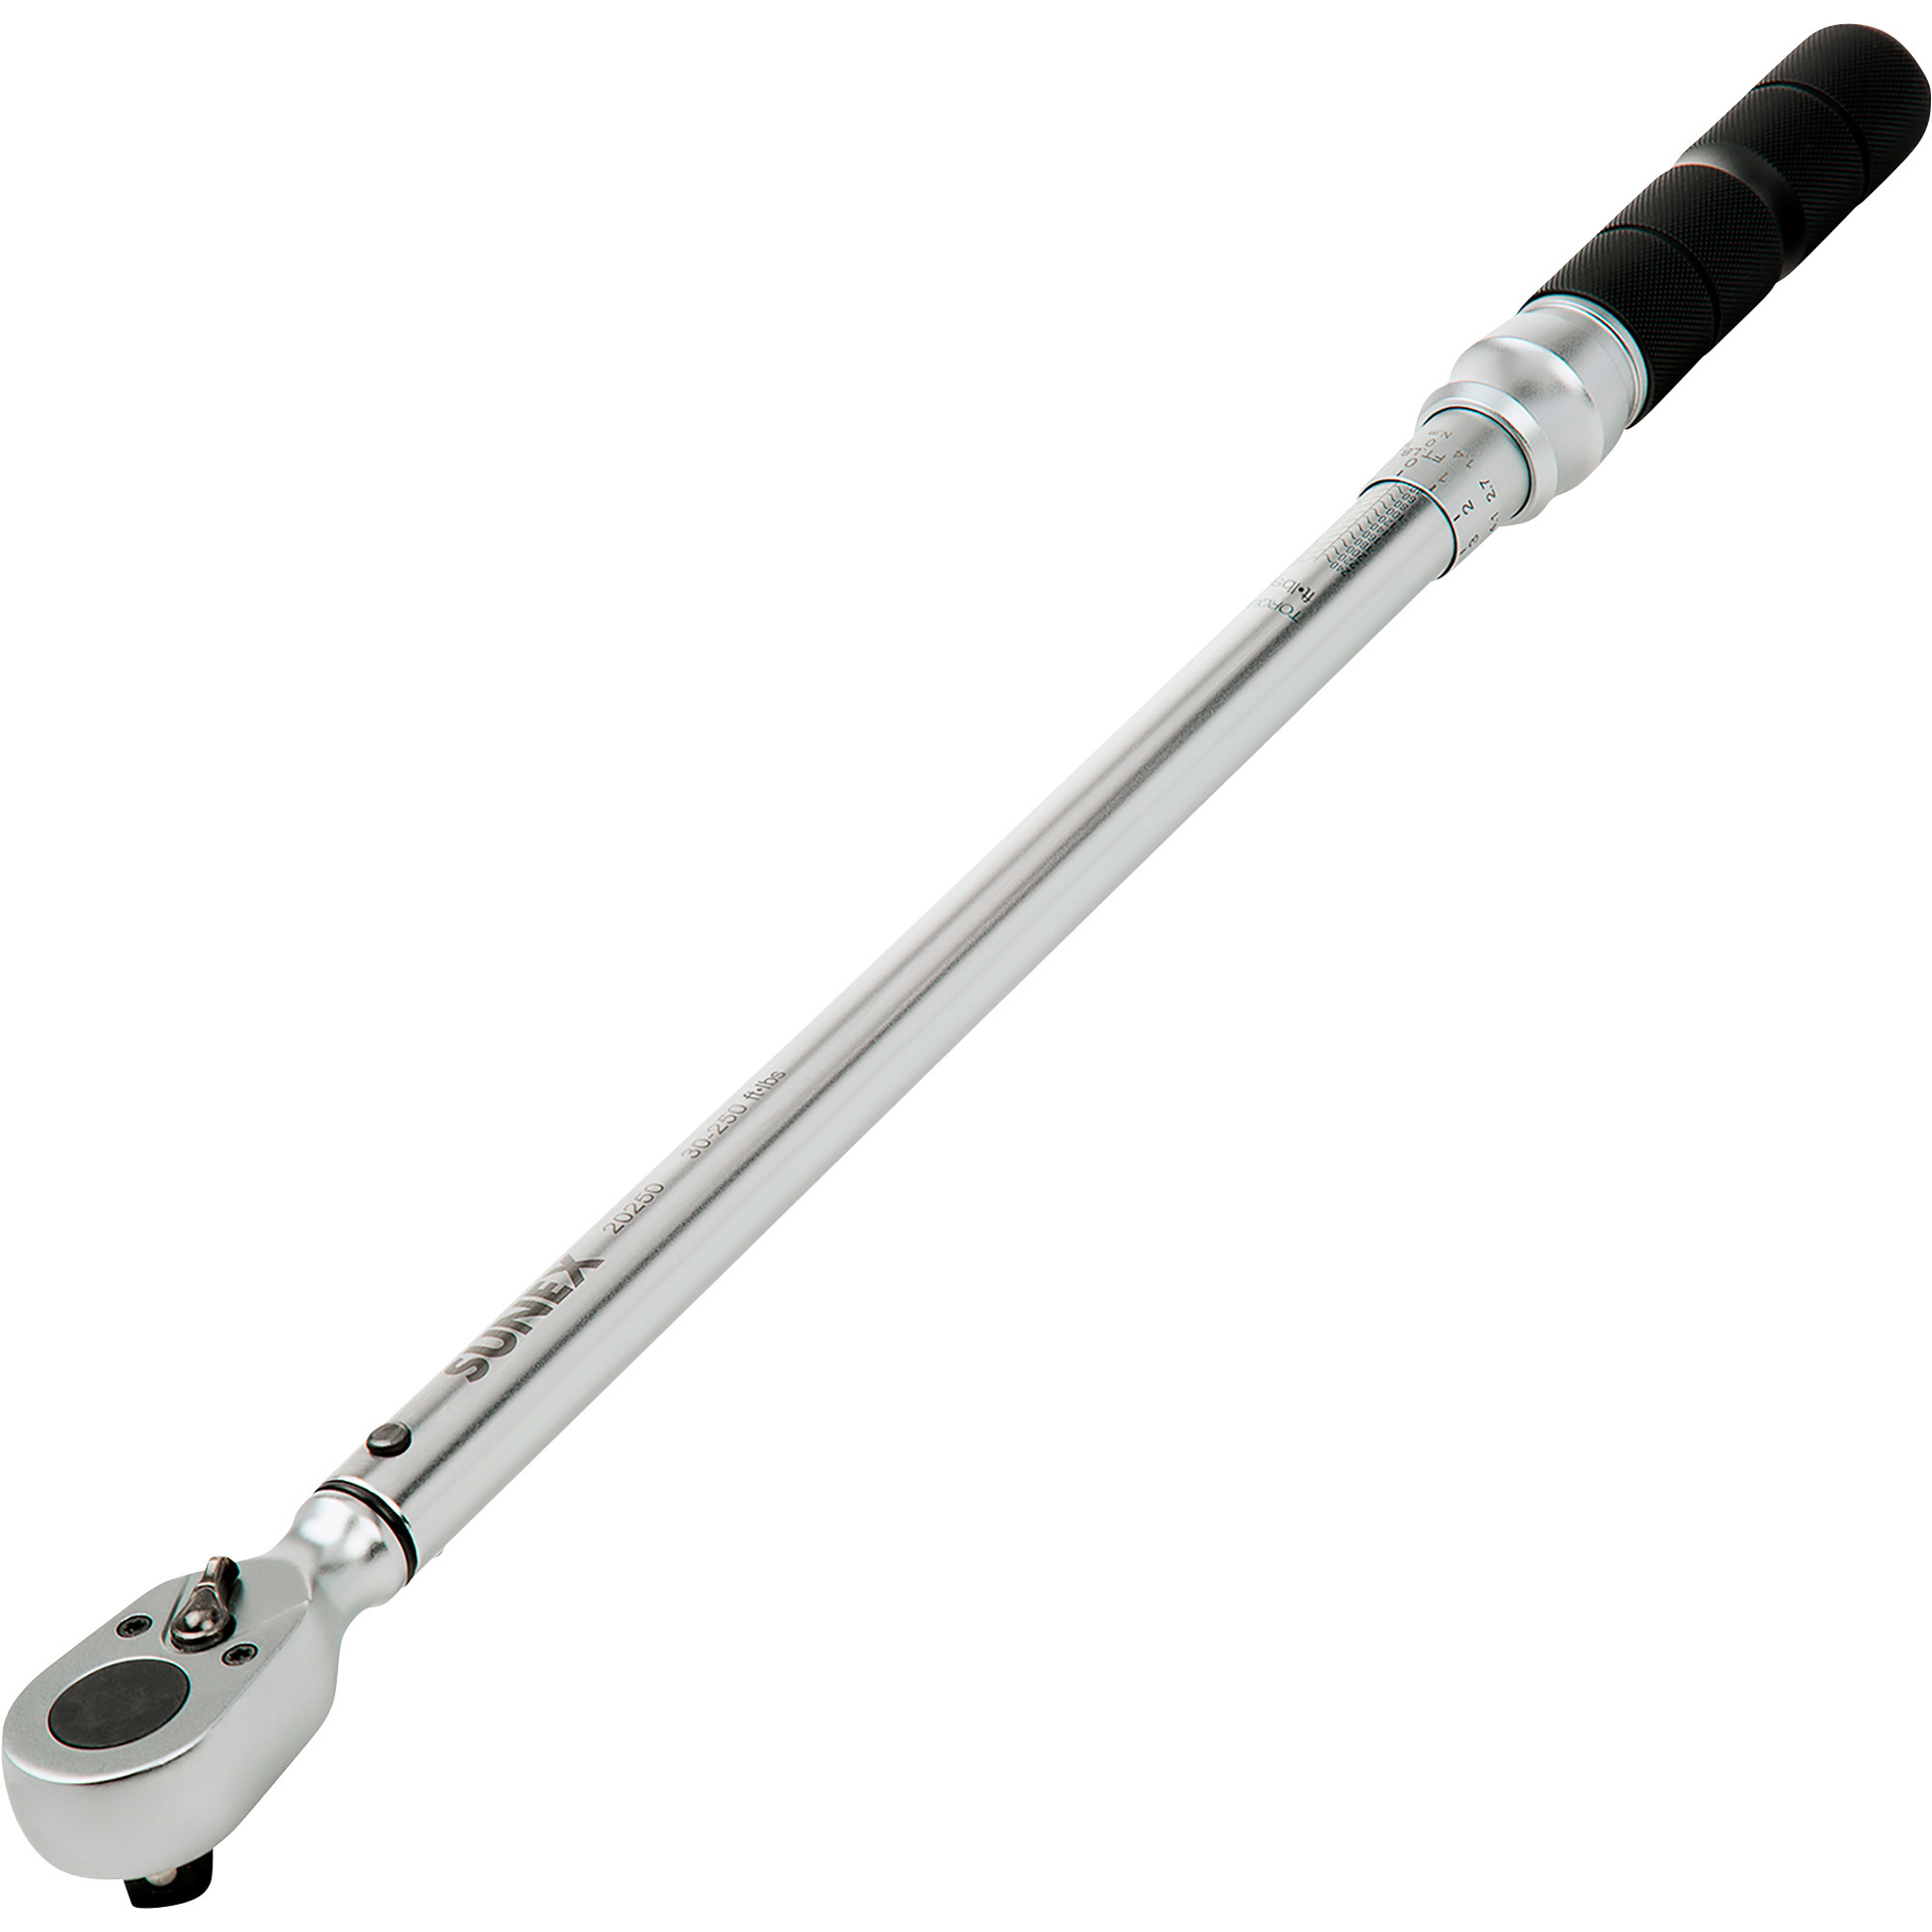 Sunex 1/2Inch Drive Dual Direction Torque Wrench, 48 Tooth, Model 20250